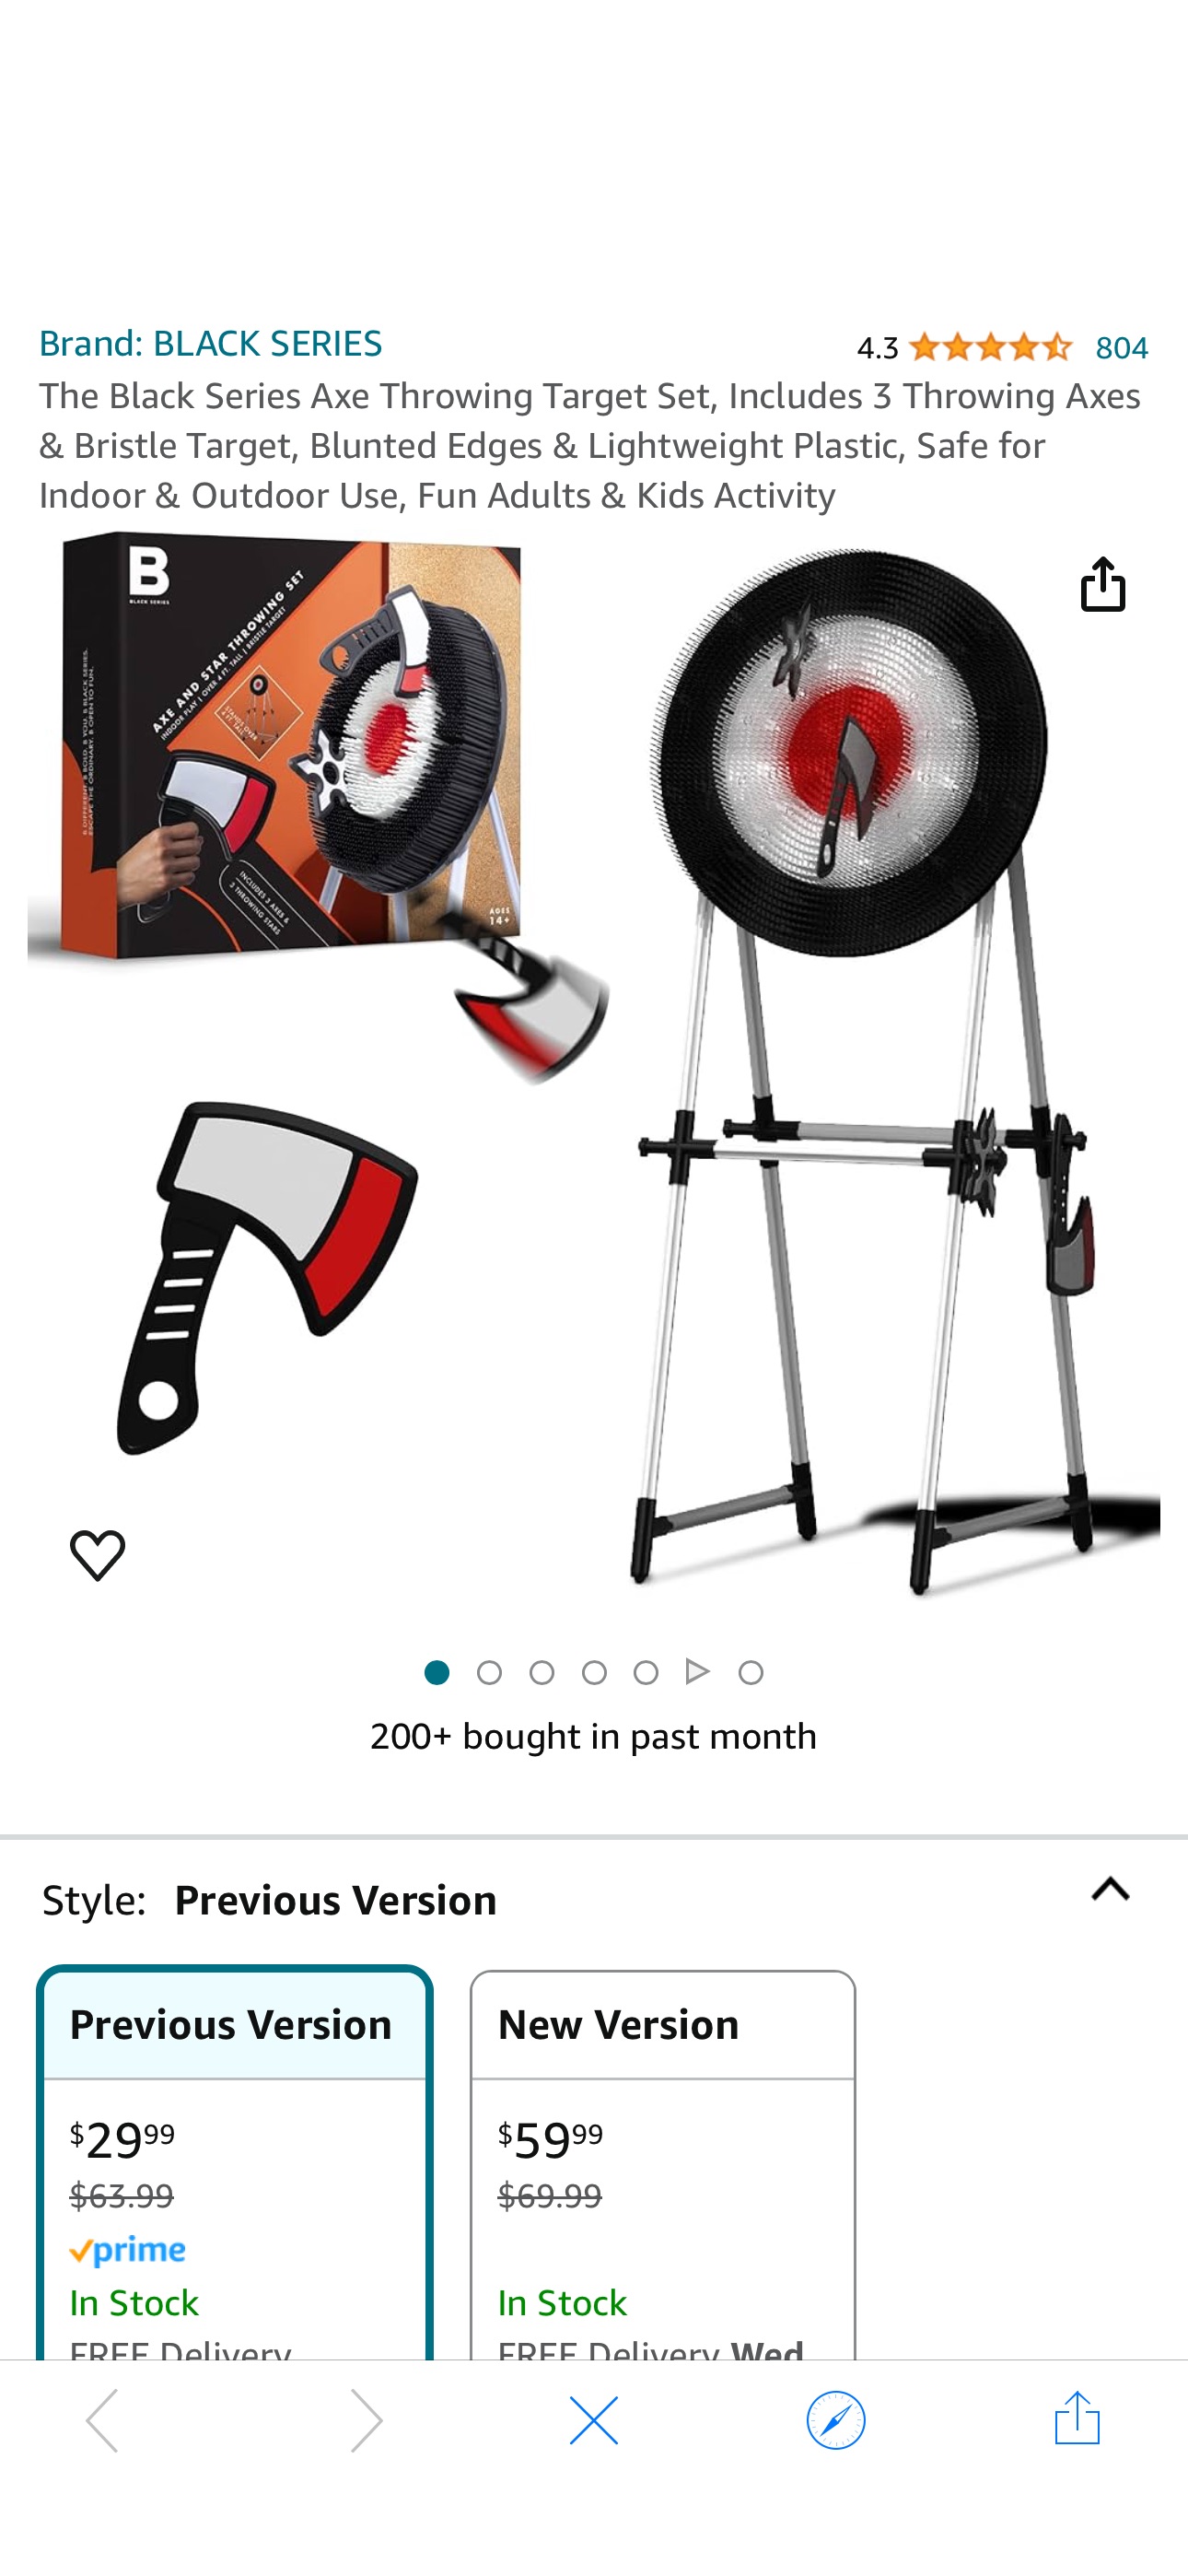 Amazon.com: The Black Series Axe Throwing Target Set, Includes 3 Throwing Axes & Bristle Target, Blunted Edges & Lightweight Plastic, Safe for Indoor & Outdoor Use, Fun Adults & Kids Activity : Sports